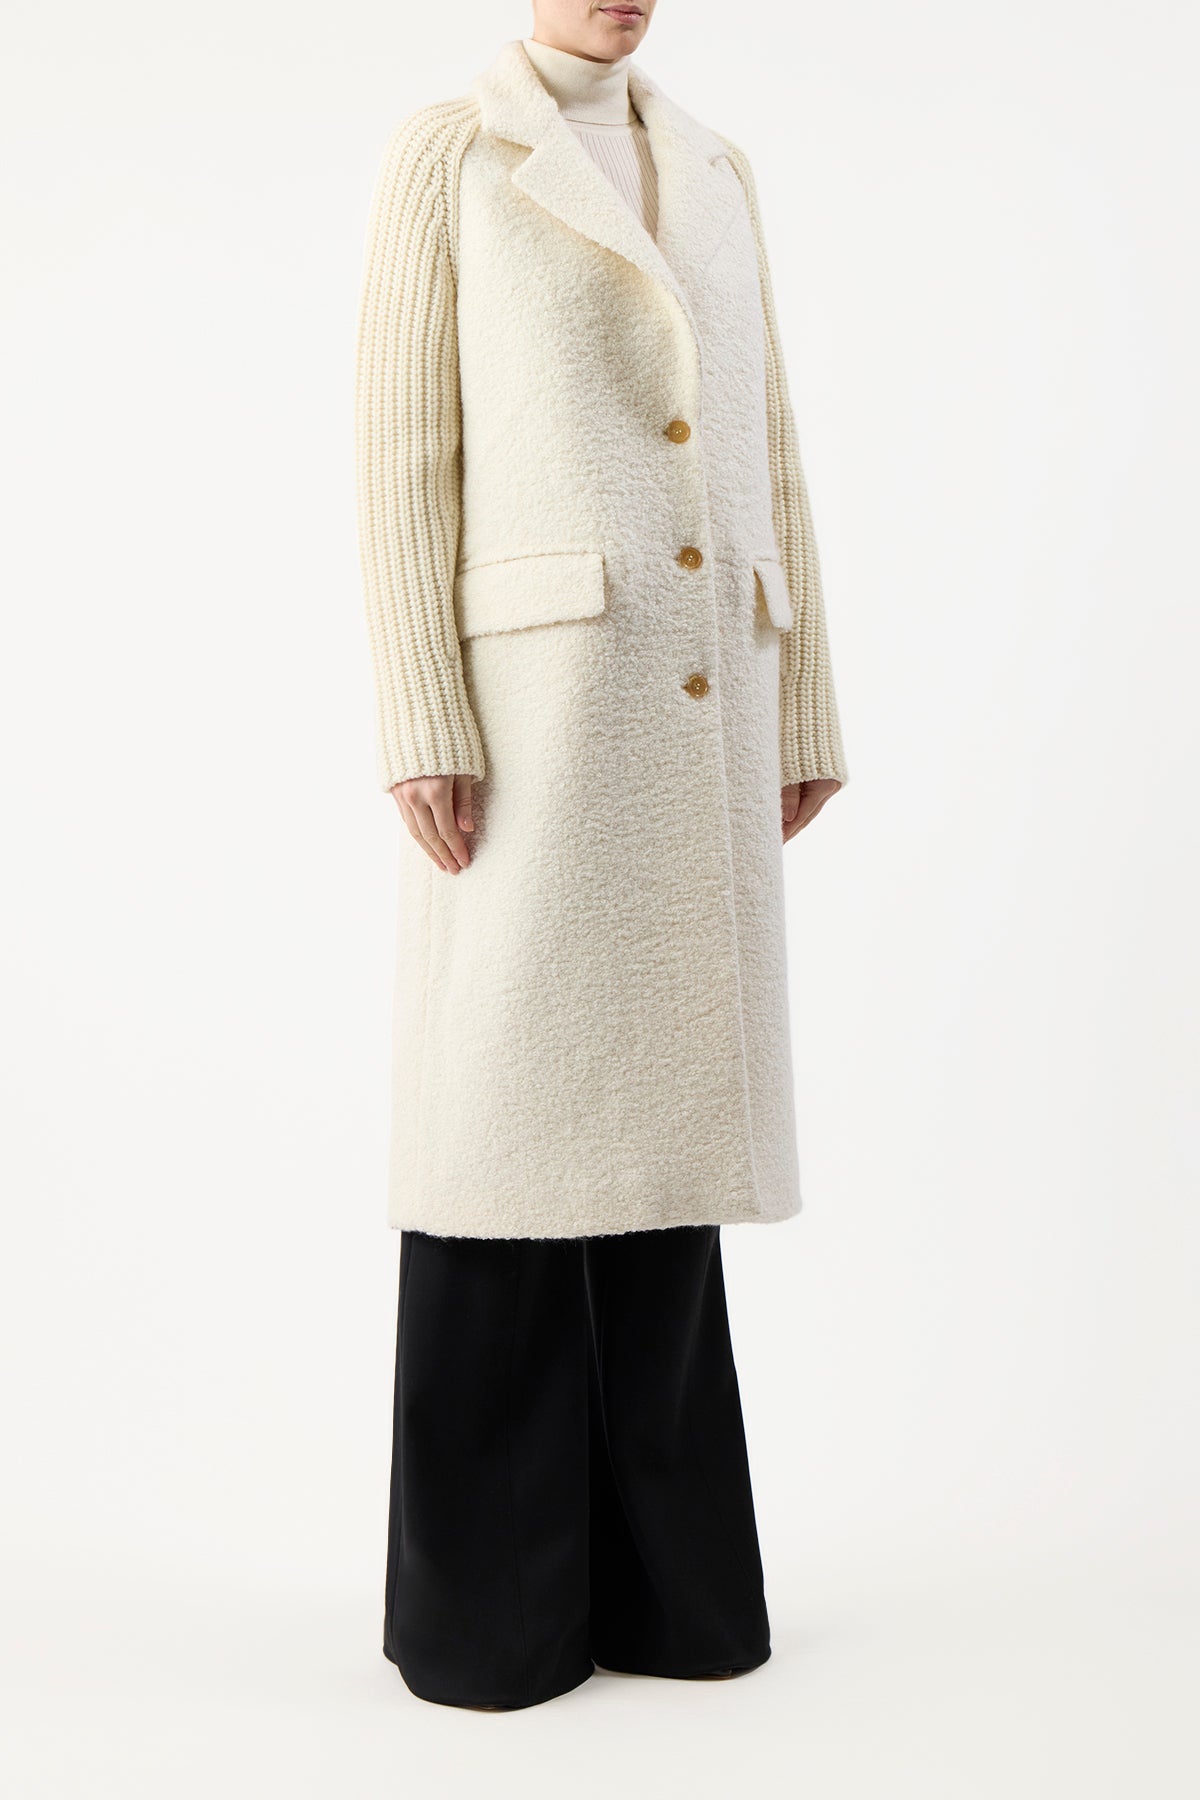 Charles Coat in Cashmere Boucle